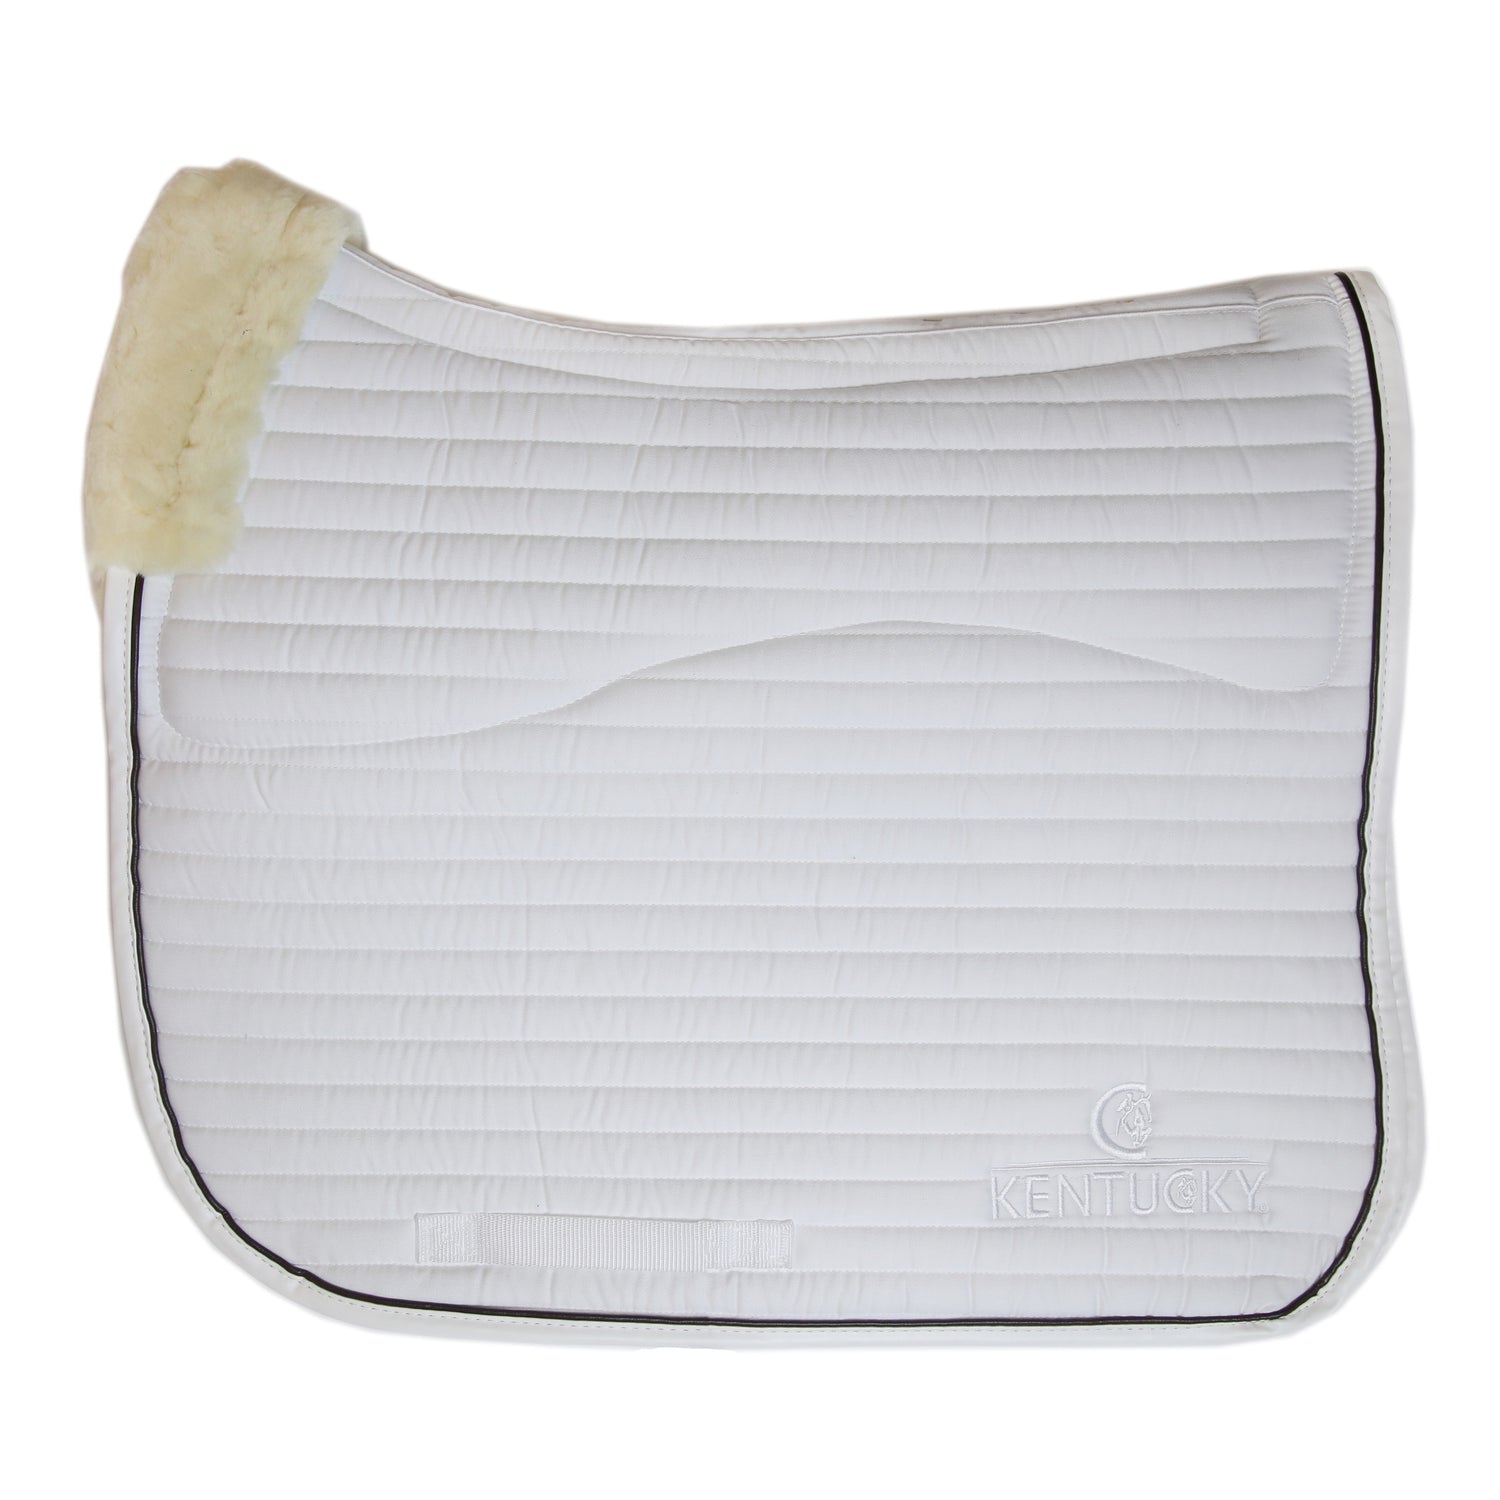 The Kentucky Horsewear Skin Friendly Dressage Pad offers extreme cushioning and support between the horses back and the saddle whilst preventing friction. 